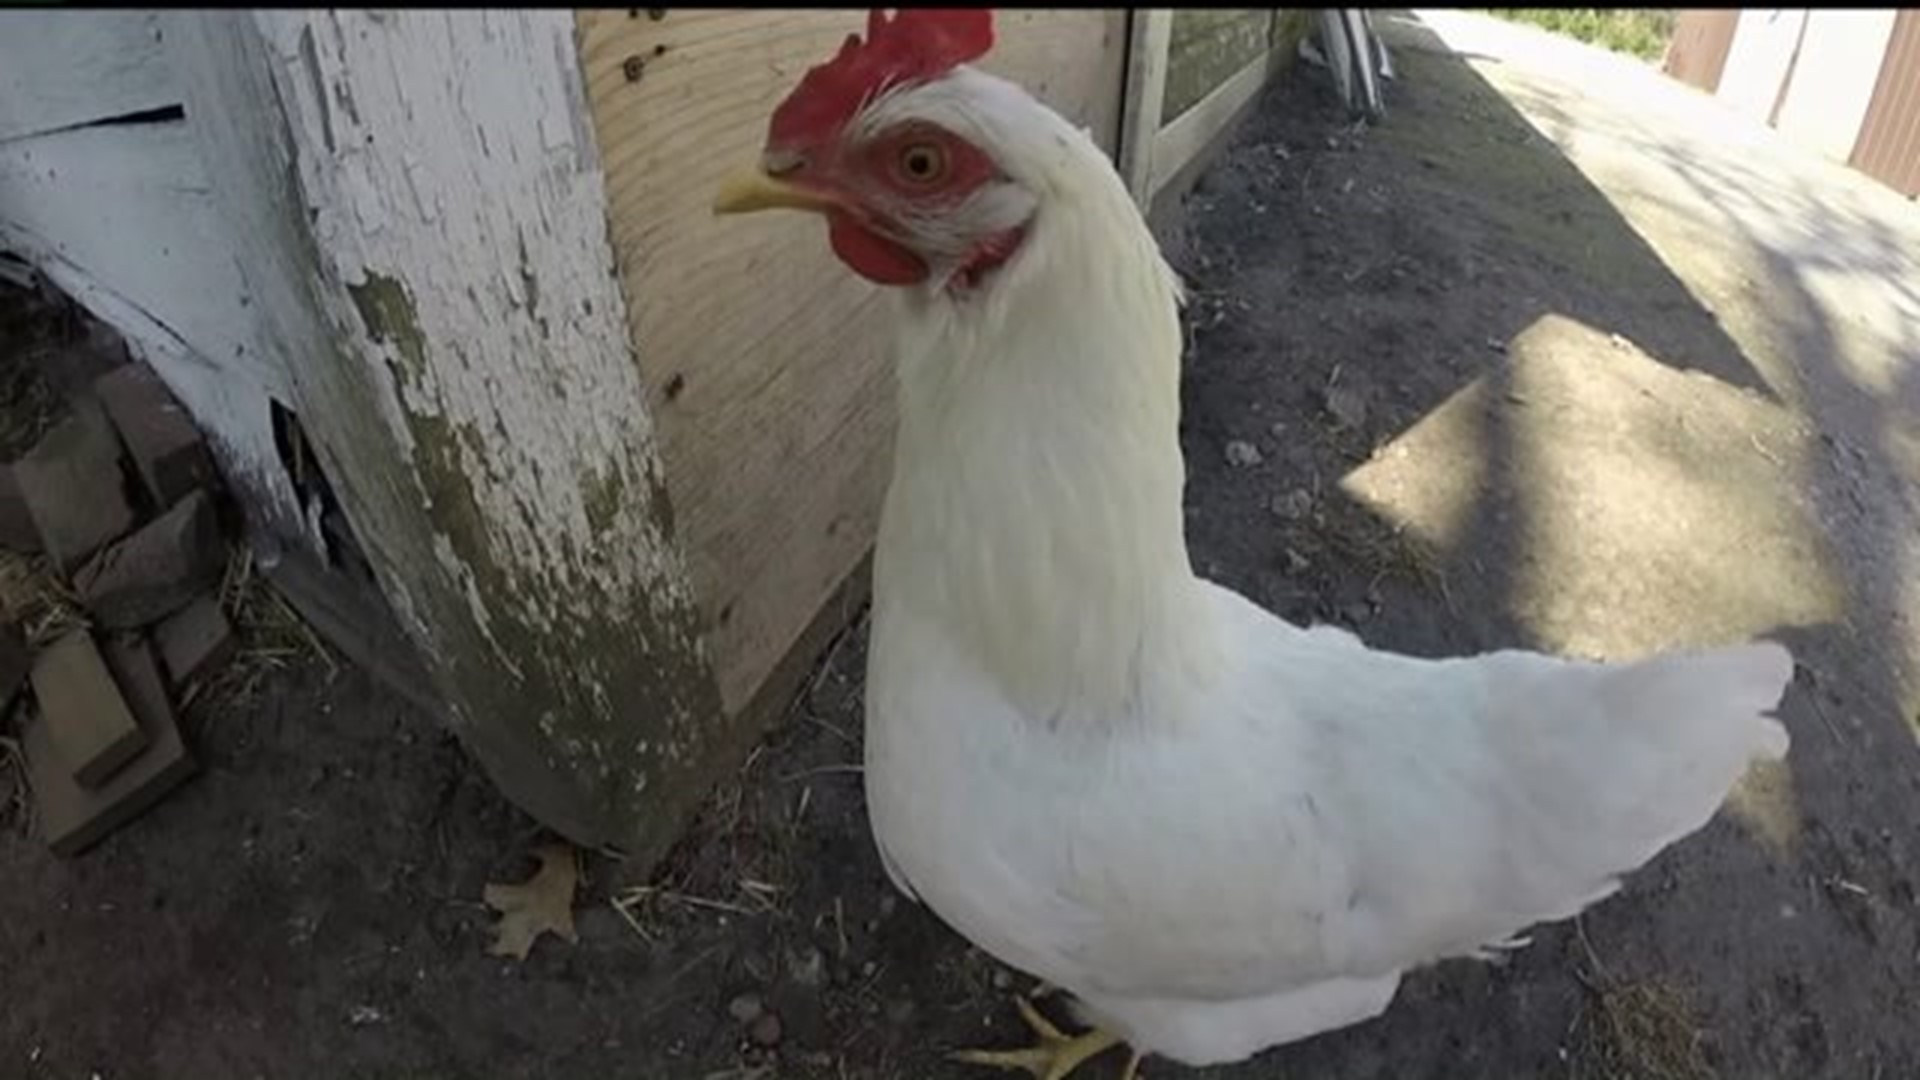 Backyard chickens get the go-ahead in Moline